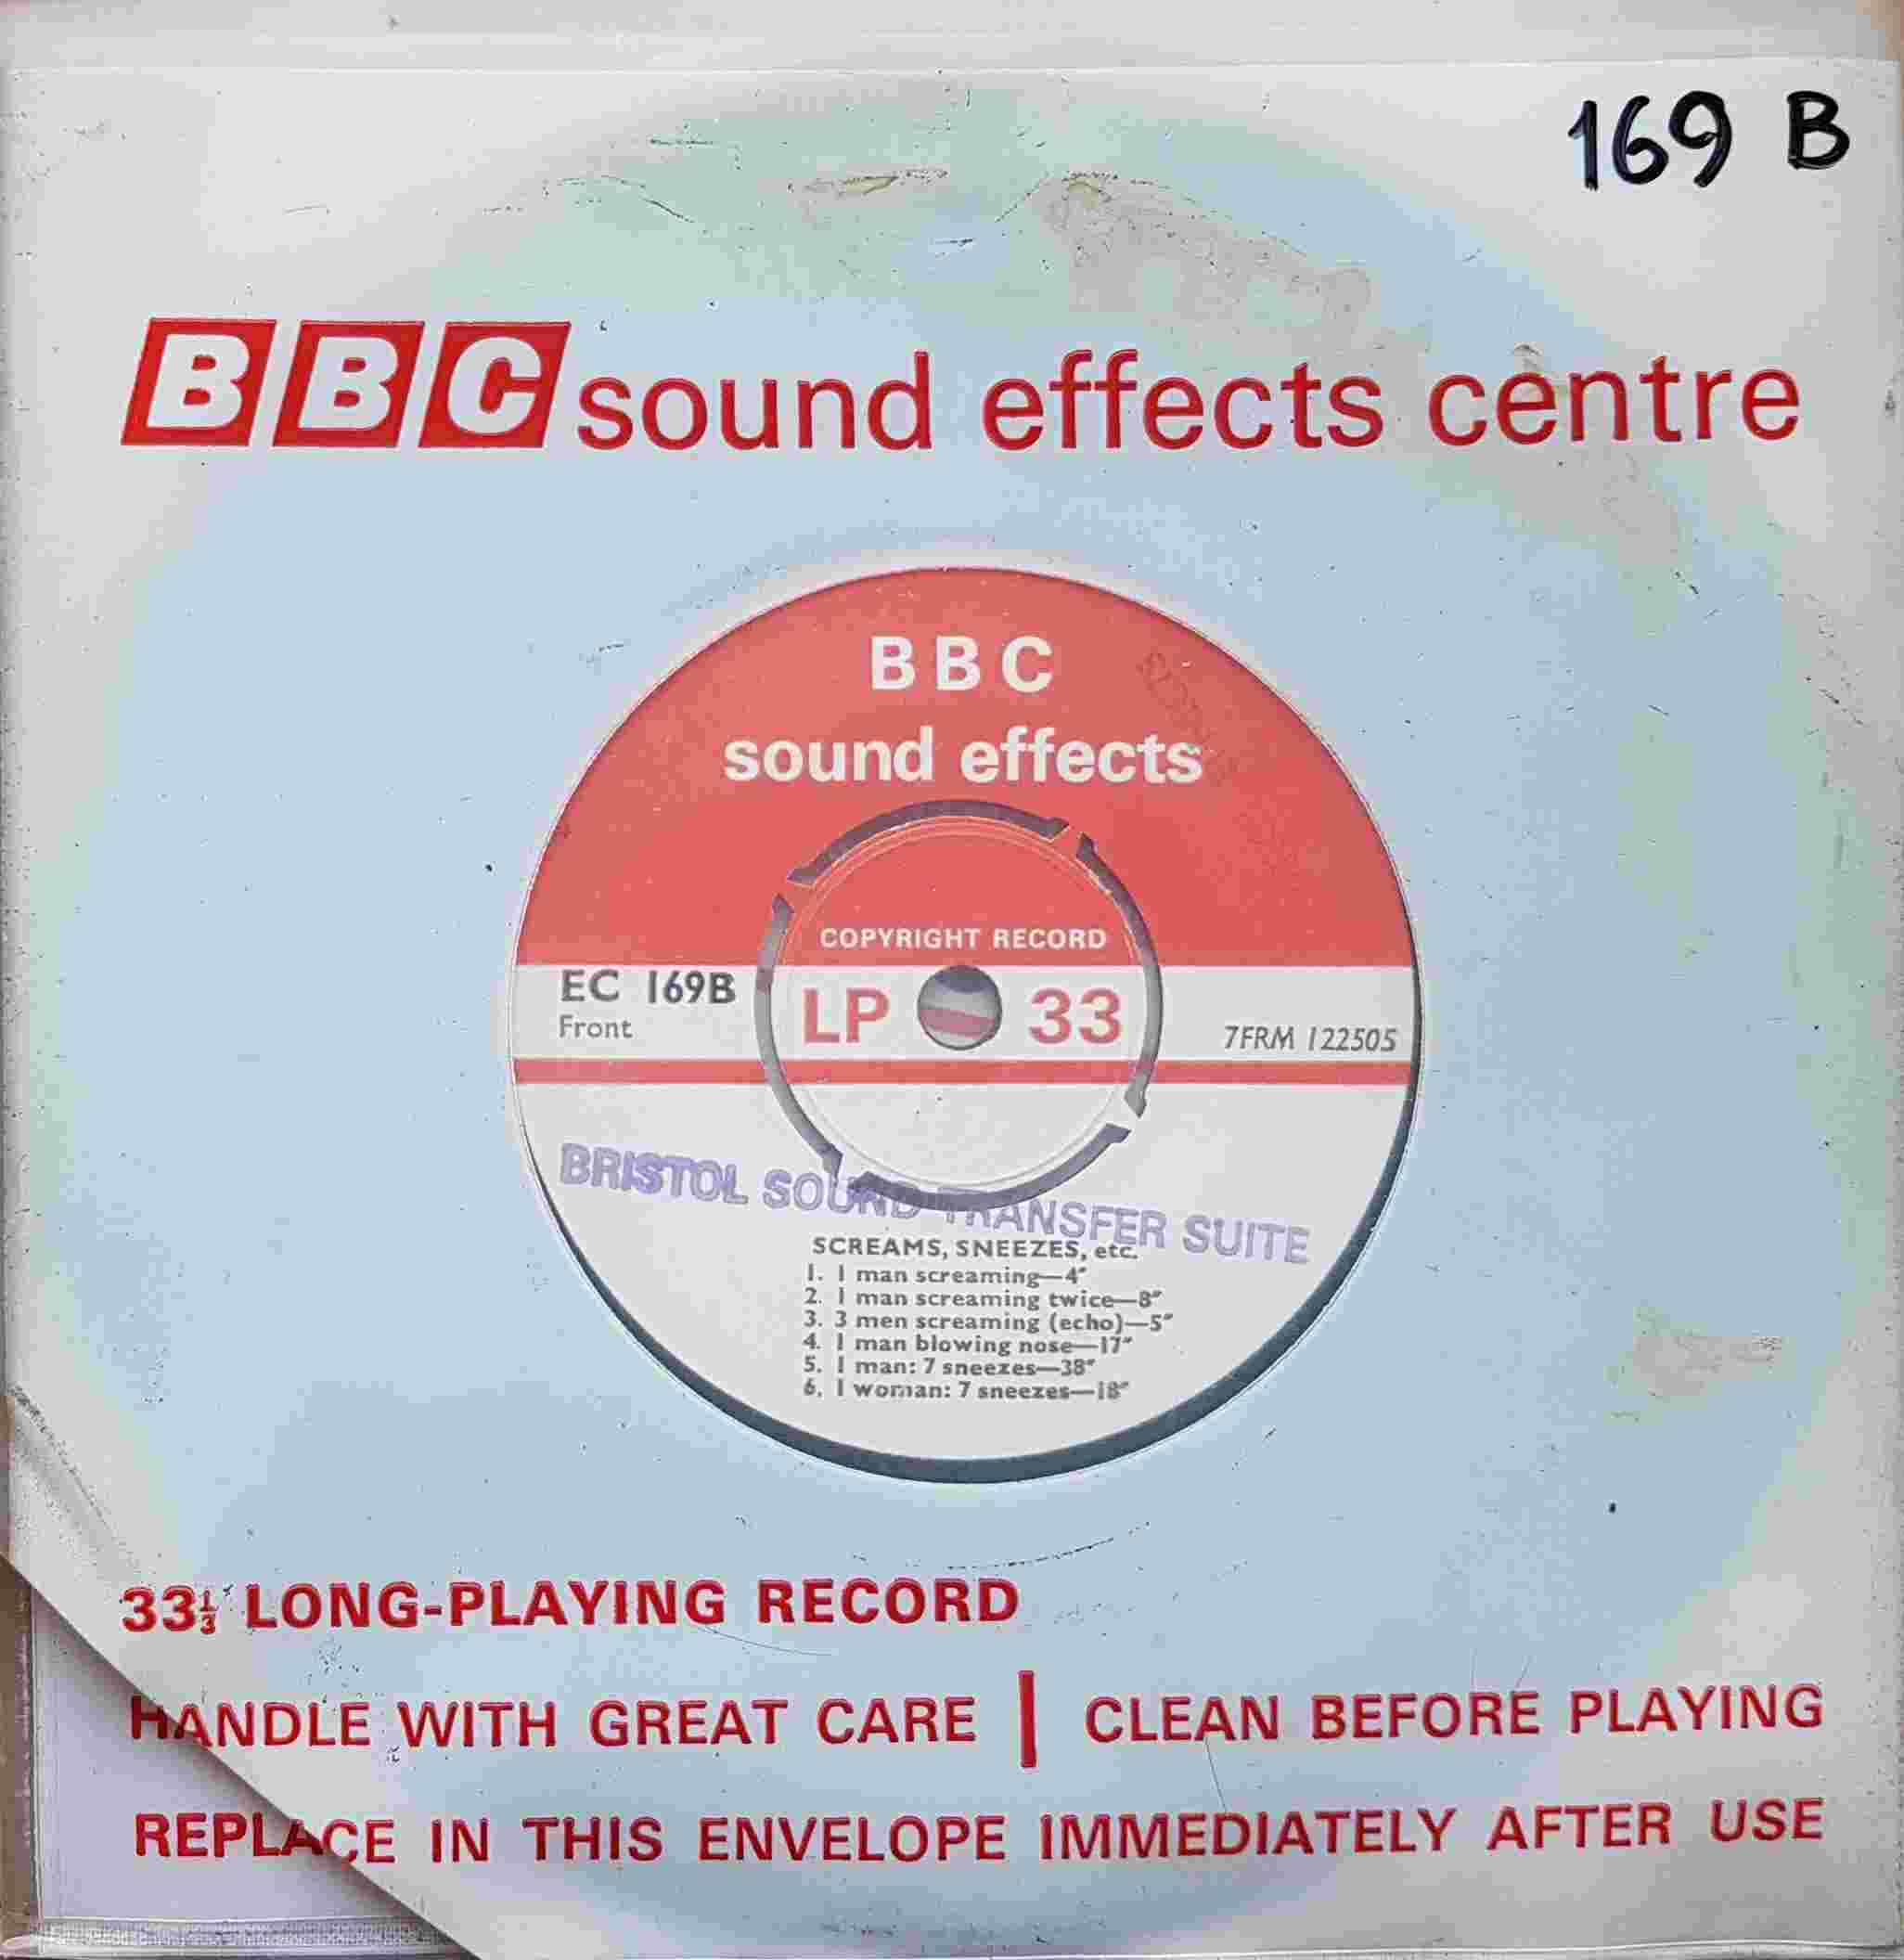 Picture of EC 169B Screams, sneezes, etc. / Coughing, breathing, etc. by artist Not registered from the BBC records and Tapes library